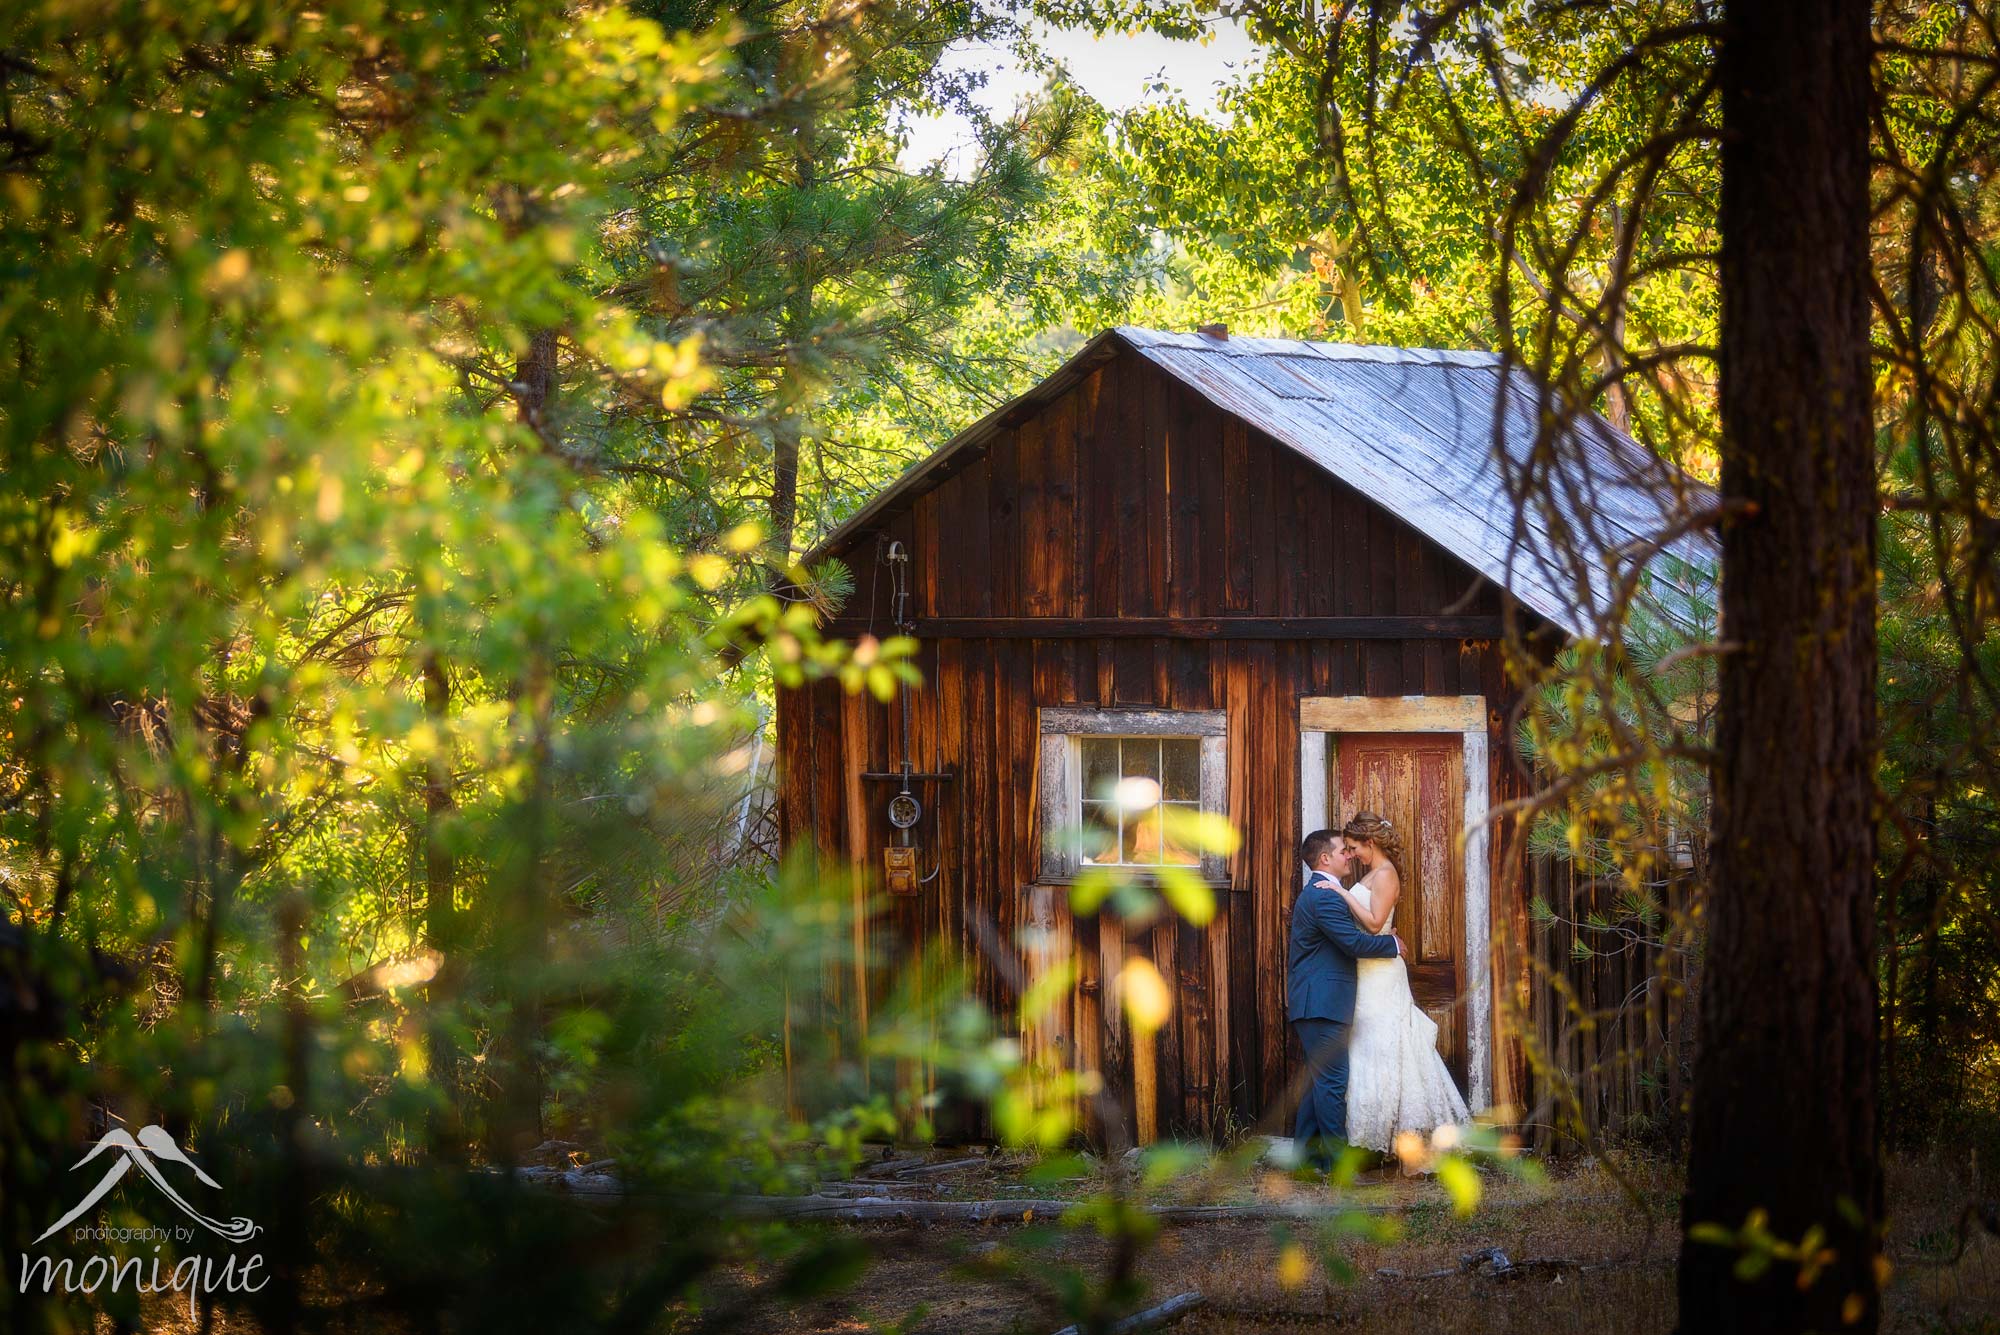 Twenty Mile House wedding photography bride and groom portrait in front of old mining shed